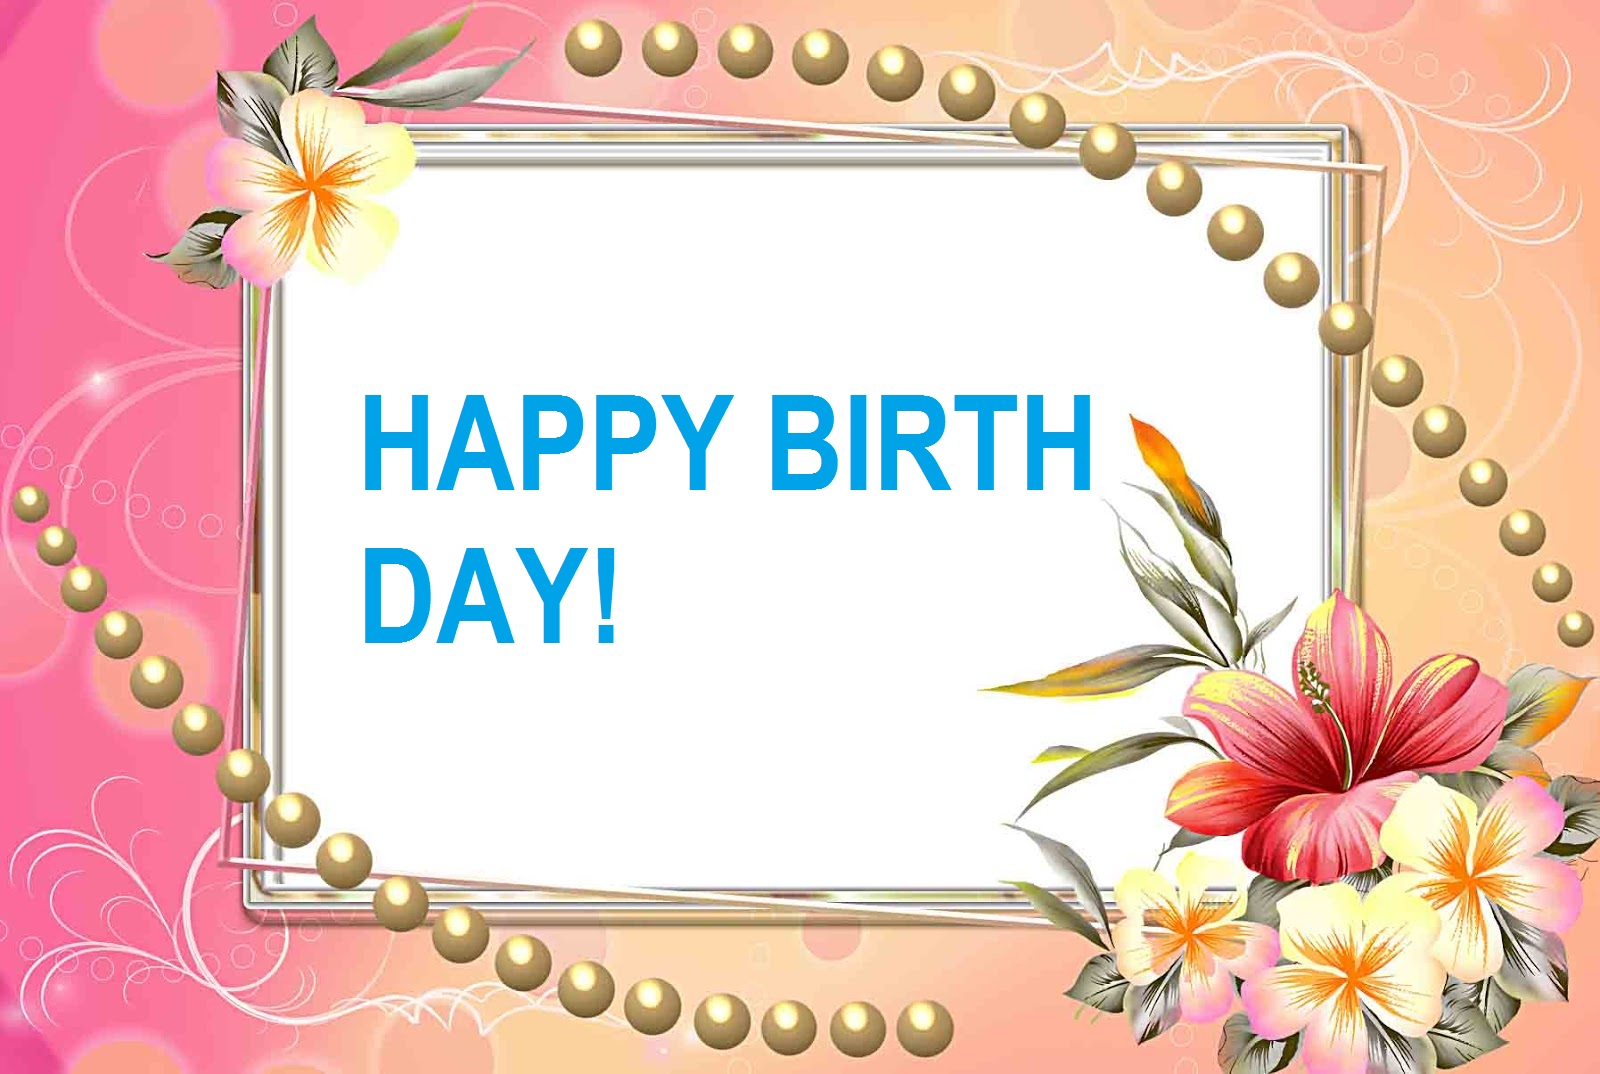 Download-birthday-Pictures-wallpapers